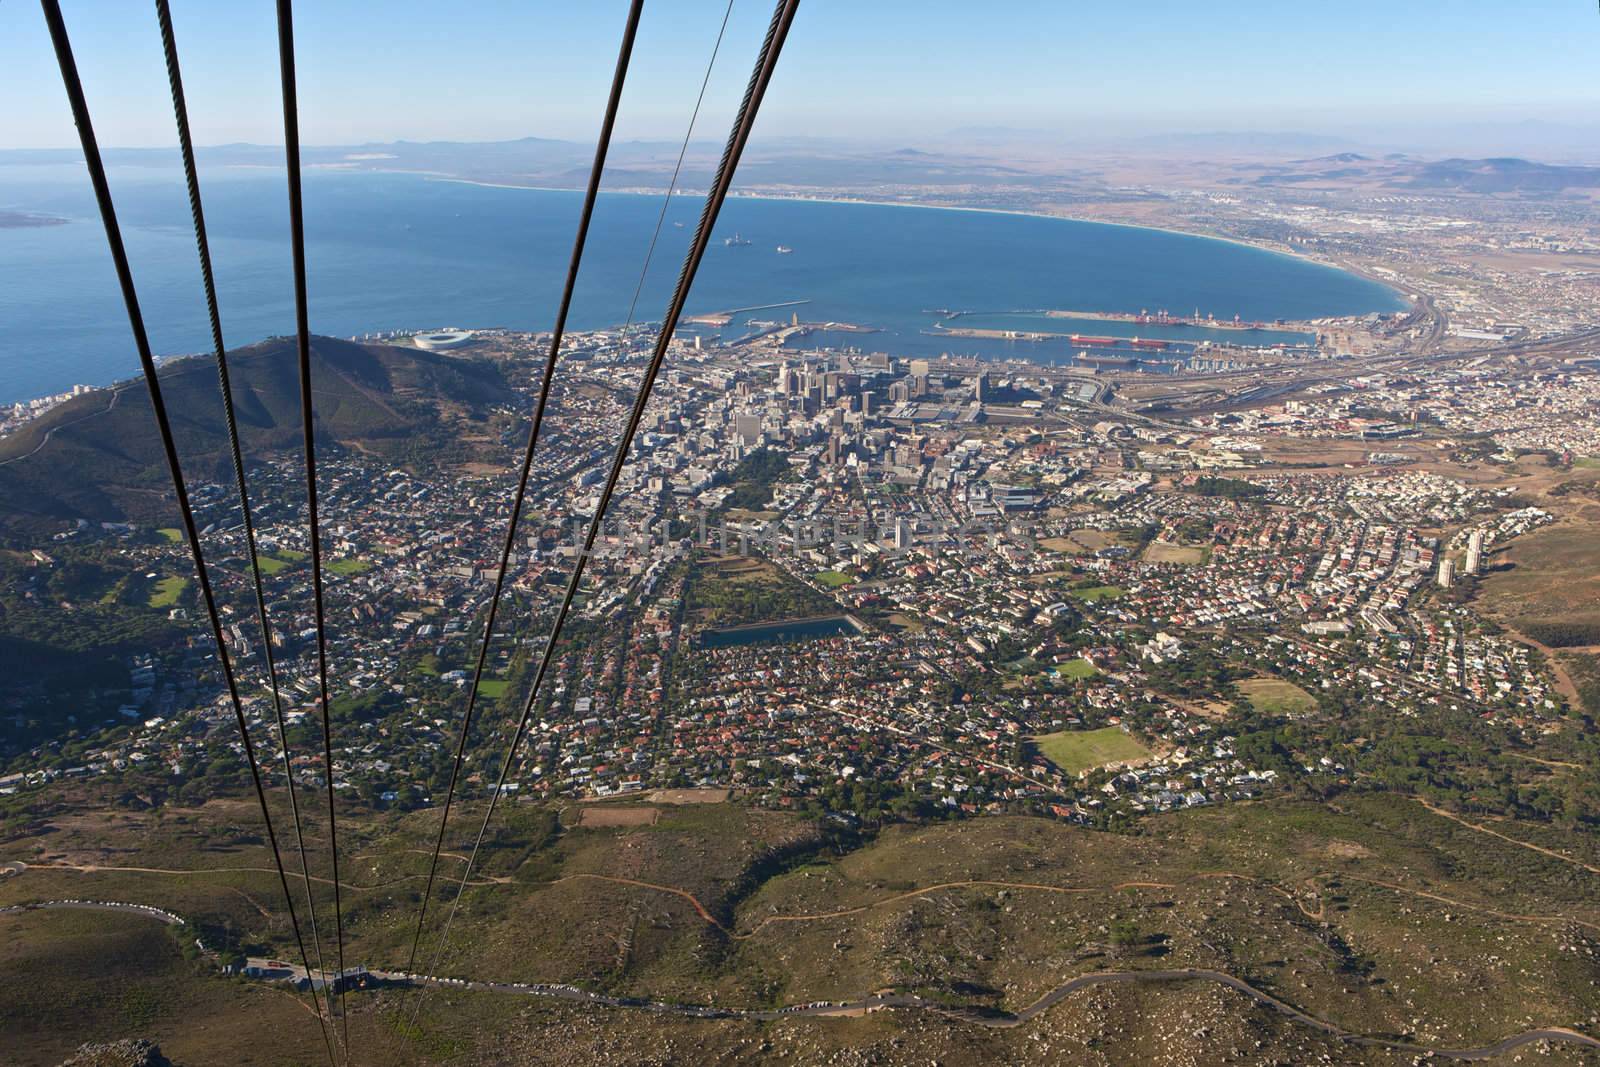 South Africa, Cape Town seen from the Table Mountain Cable Car